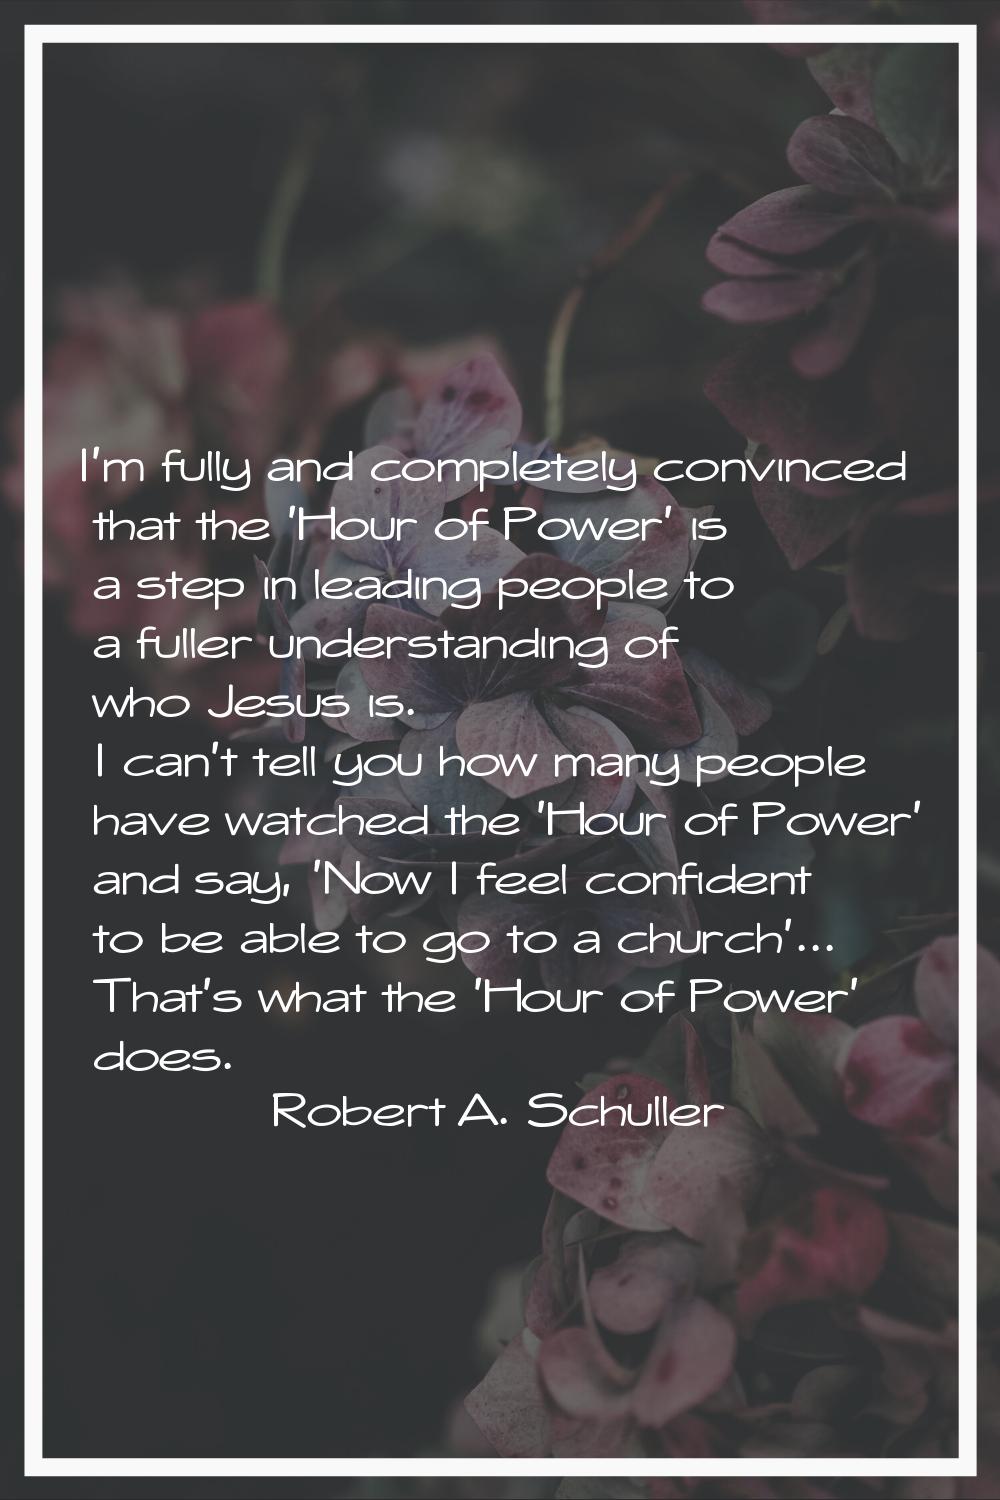 I'm fully and completely convinced that the 'Hour of Power' is a step in leading people to a fuller